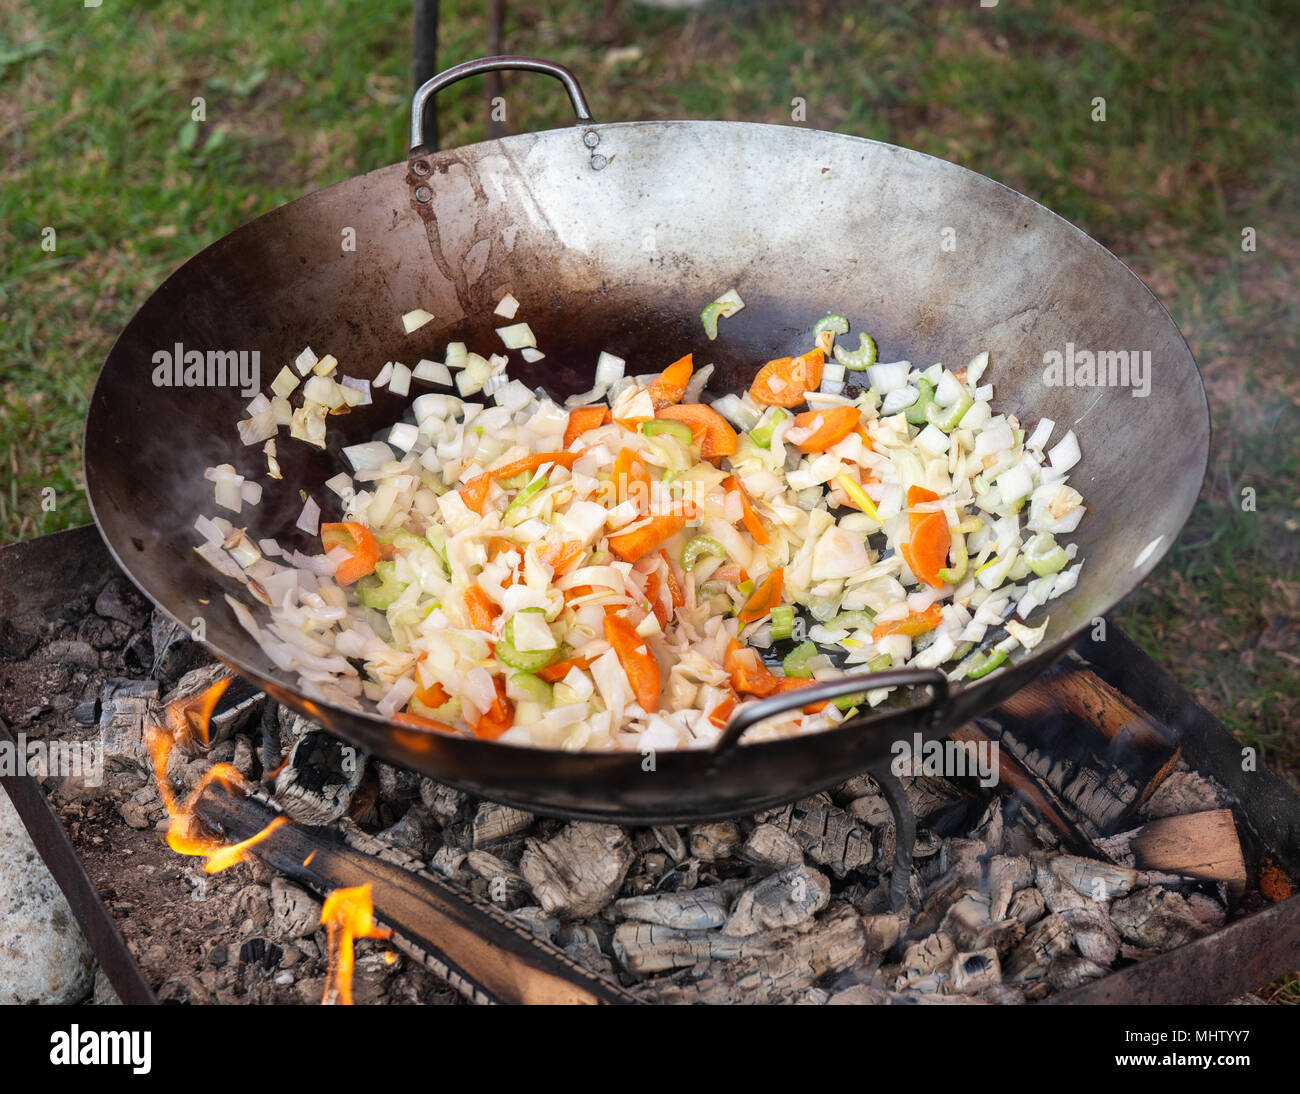 https://c8.alamy.com/comp/MHTYY7/cabbage-cole-carrot-and-other-vegetables-fry-in-a-large-metal-pot-on-an-burning-charcoal-in-the-open-air-preparation-of-food-in-a-medieval-kitchen-MHTYY7.jpg